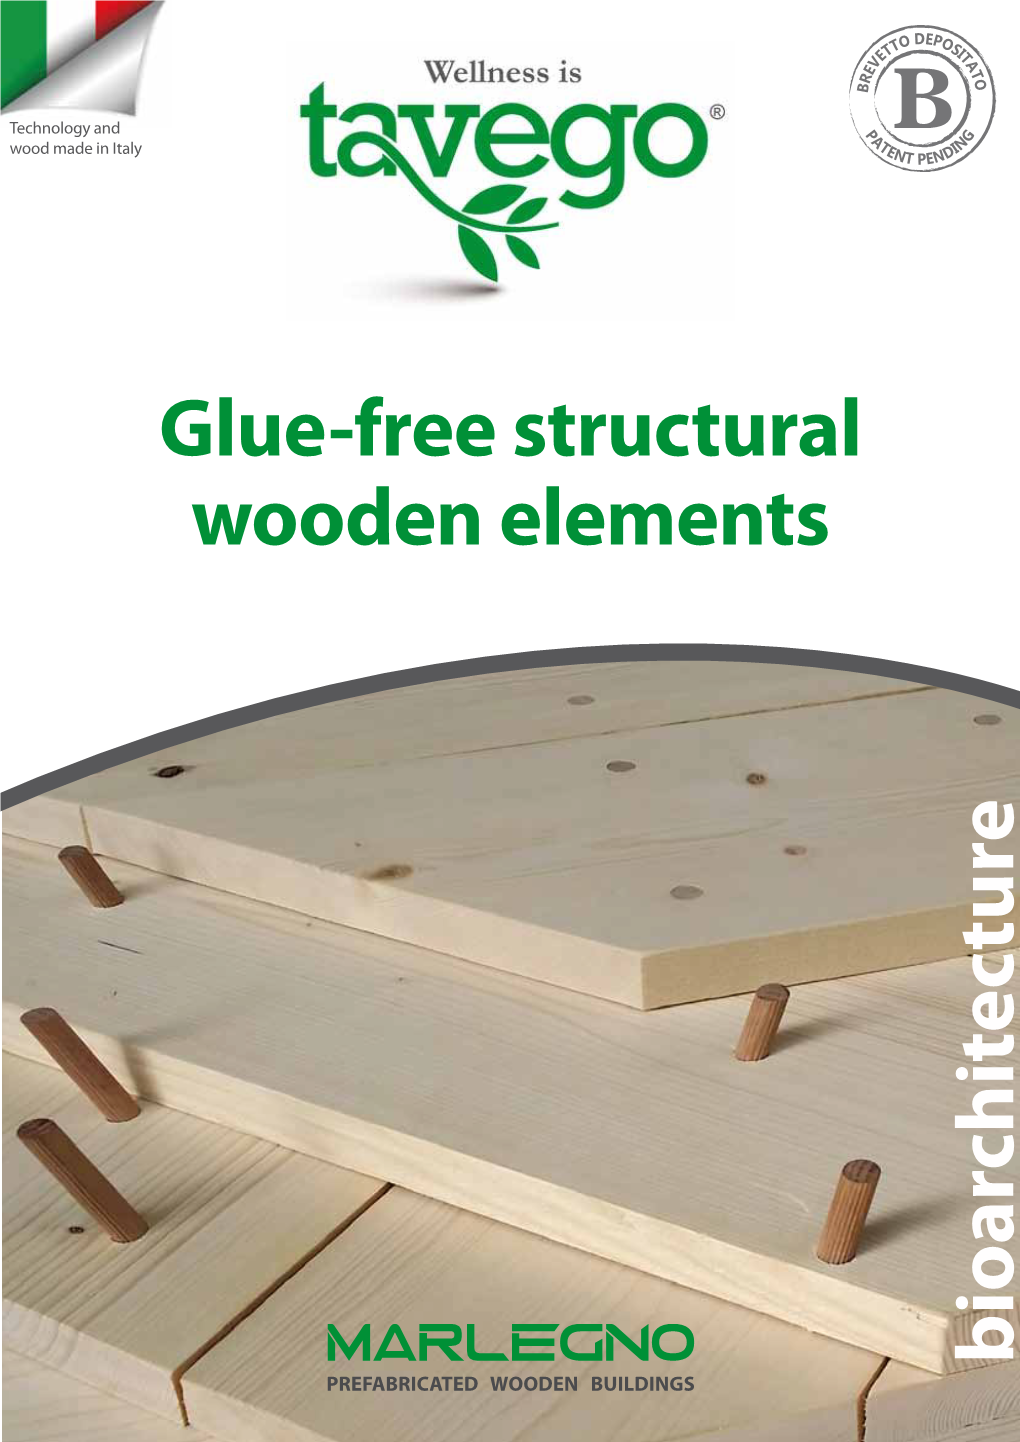 Glue-Free Structural Wooden Elements Bioarchitecture PREFABRICATED WOODEN BUILDINGS a B a E I D Te R R a O B Ss Om O - Milano - L